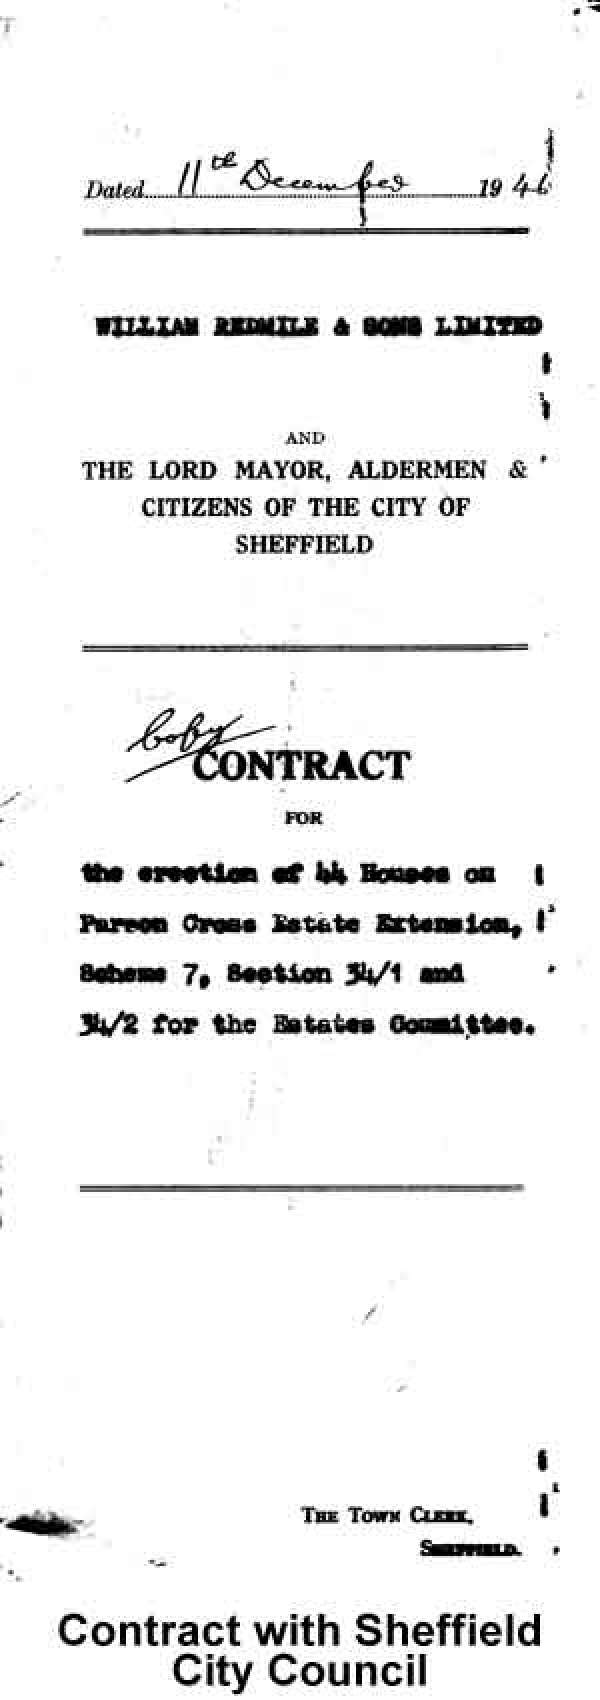 Contract with Sheffield City Council